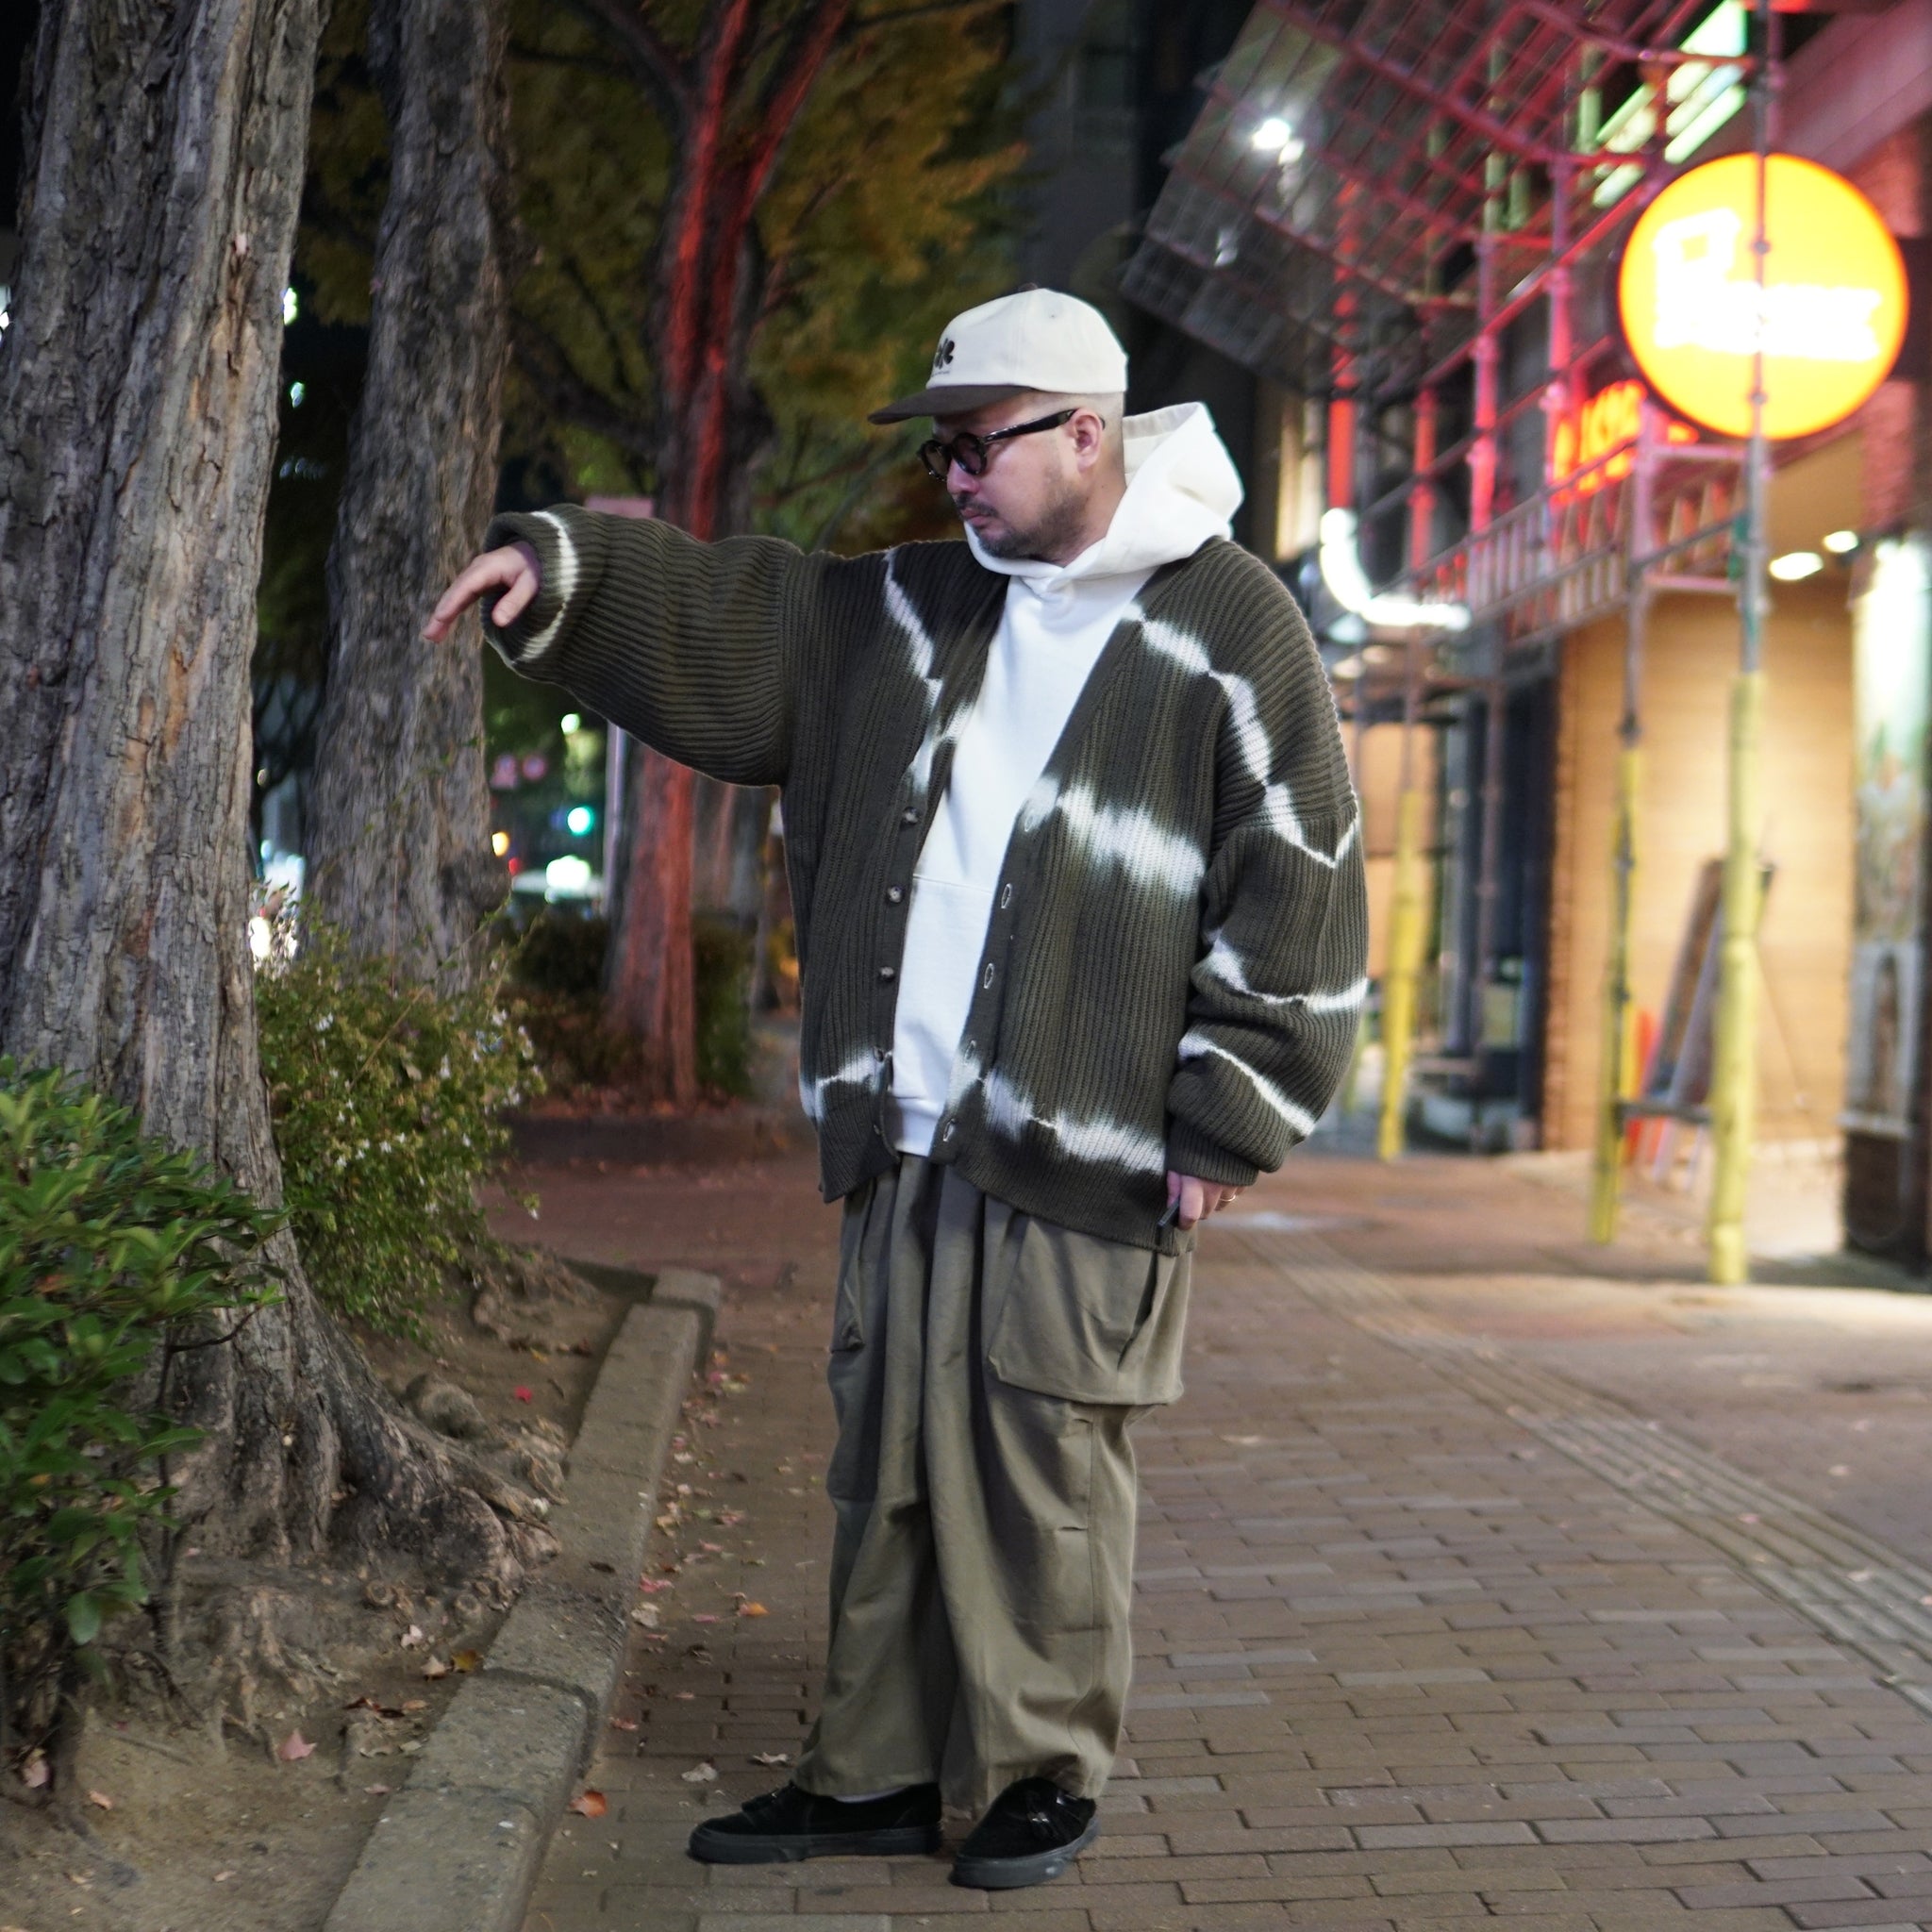 Name: Beanie Knit Cardigan | Color: Khaki/Blue 【CITYLIGHTS PRODUCTS_シティライツプロダクツ】